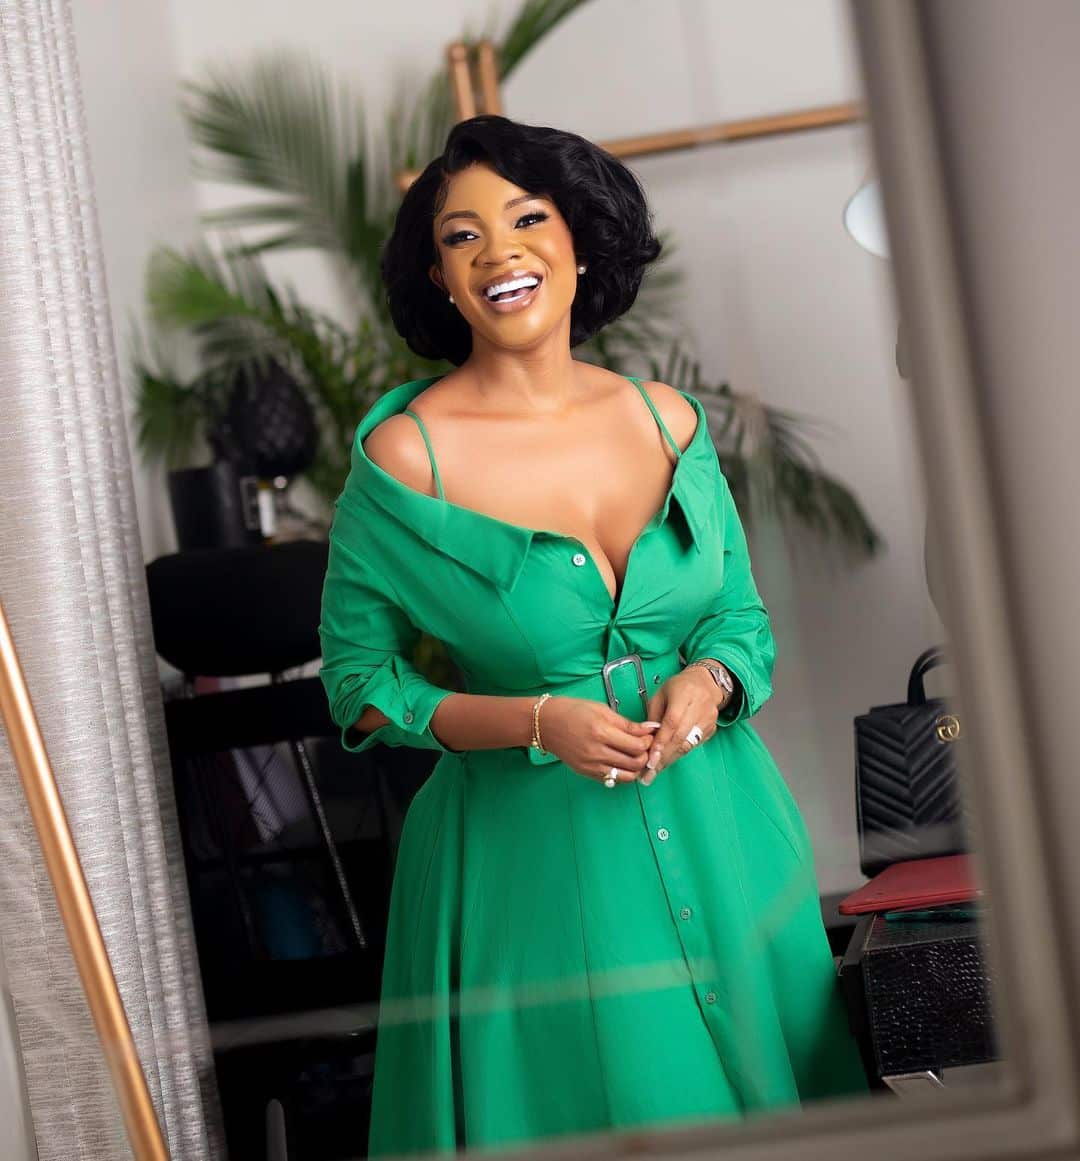 5 years ago, I underestimated the extent of my influence - Popular Ghanaian media personality, Serwaa Amihere finally reacts to her leaked s3x tape